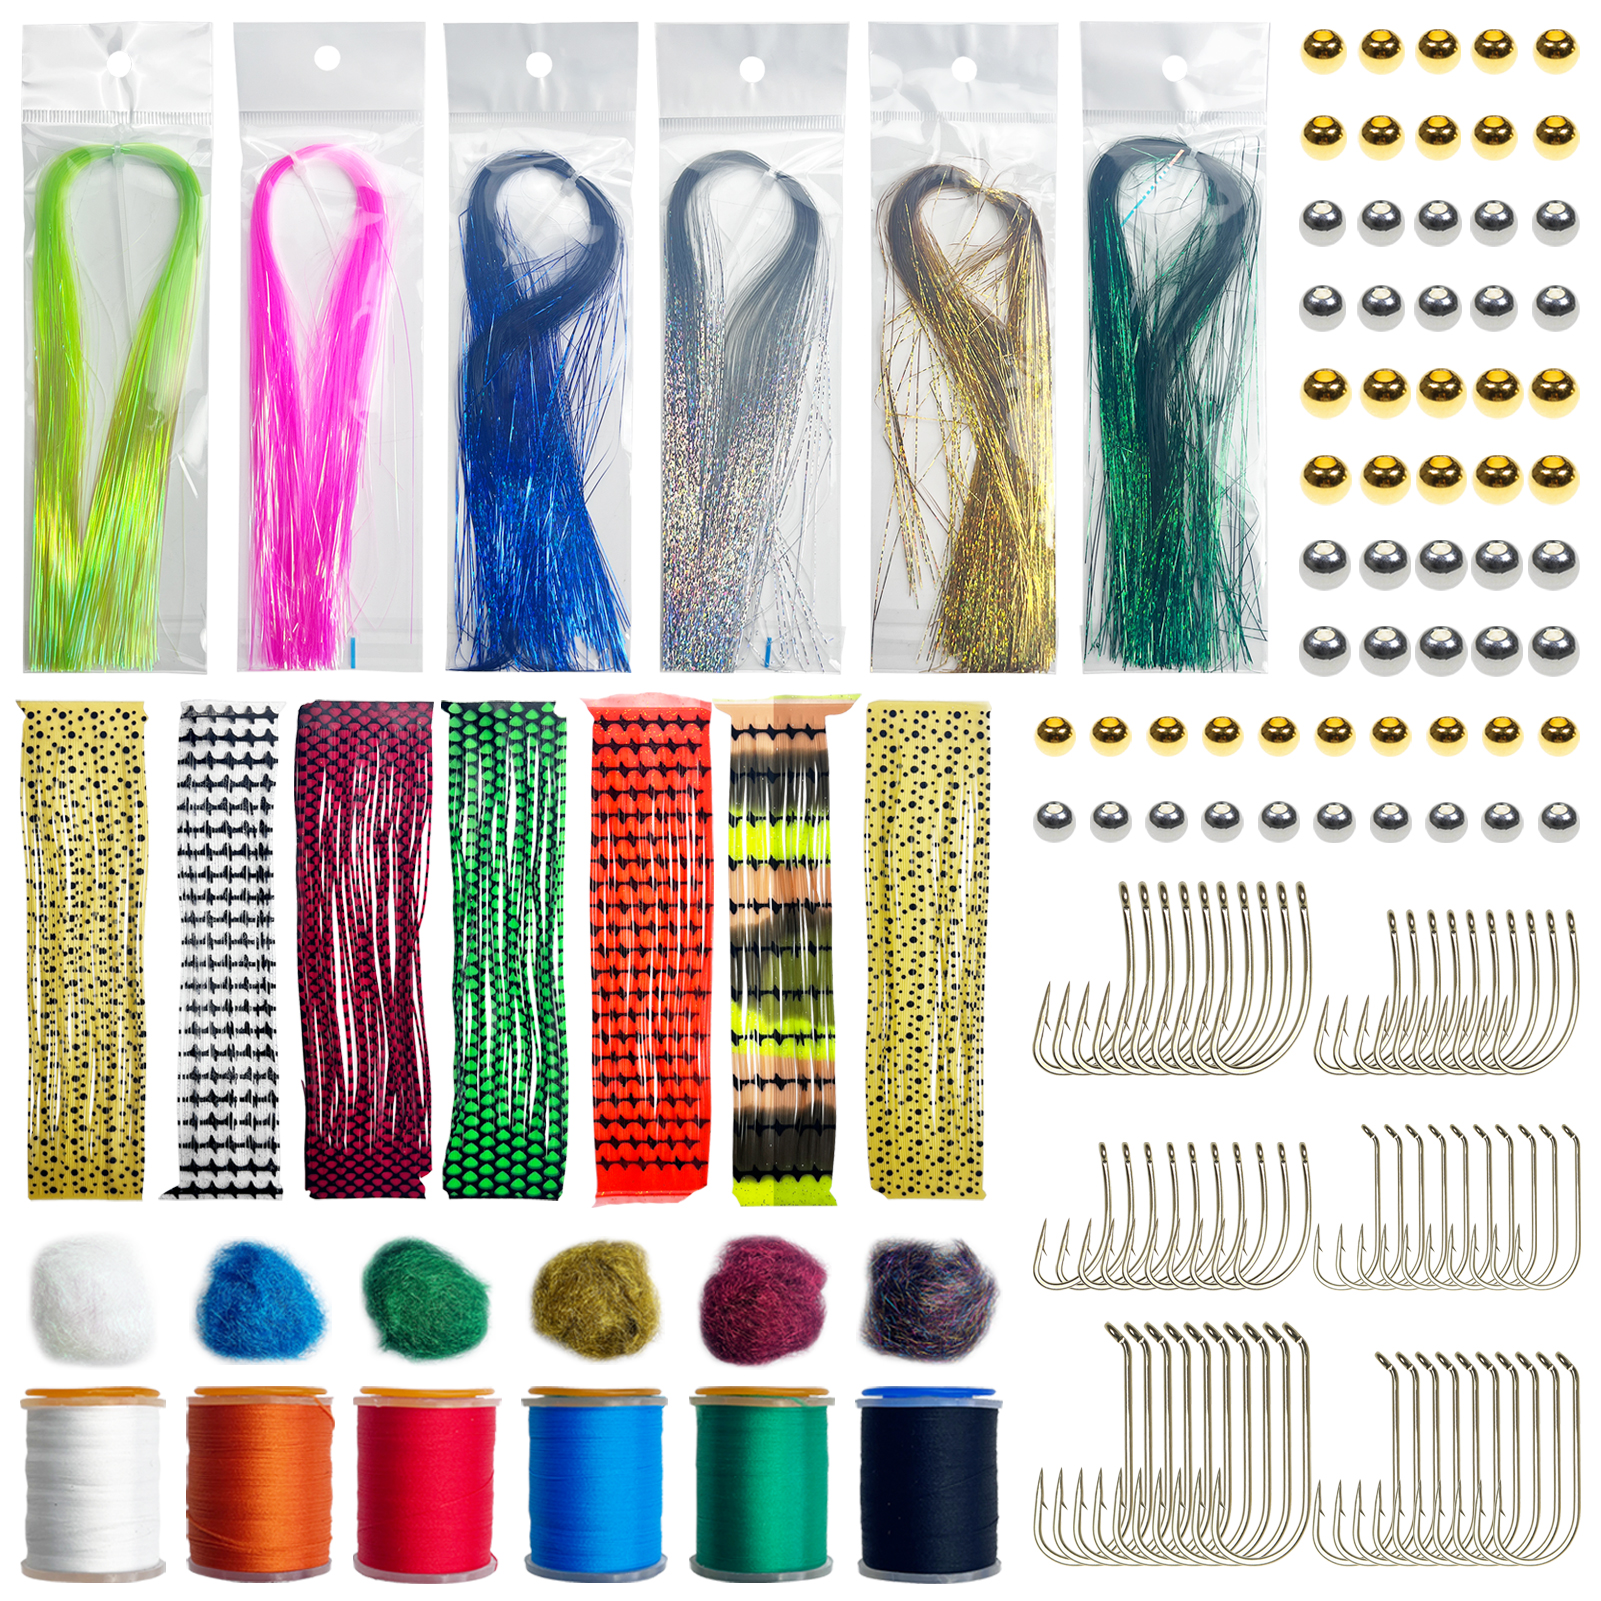 FREE FISHER 145pcs Fishing Flies Accessory Kit Tying Flies Materials Hooks Feathers Fur Thread Crystal Flash Wires Beads Fishing Line Baits